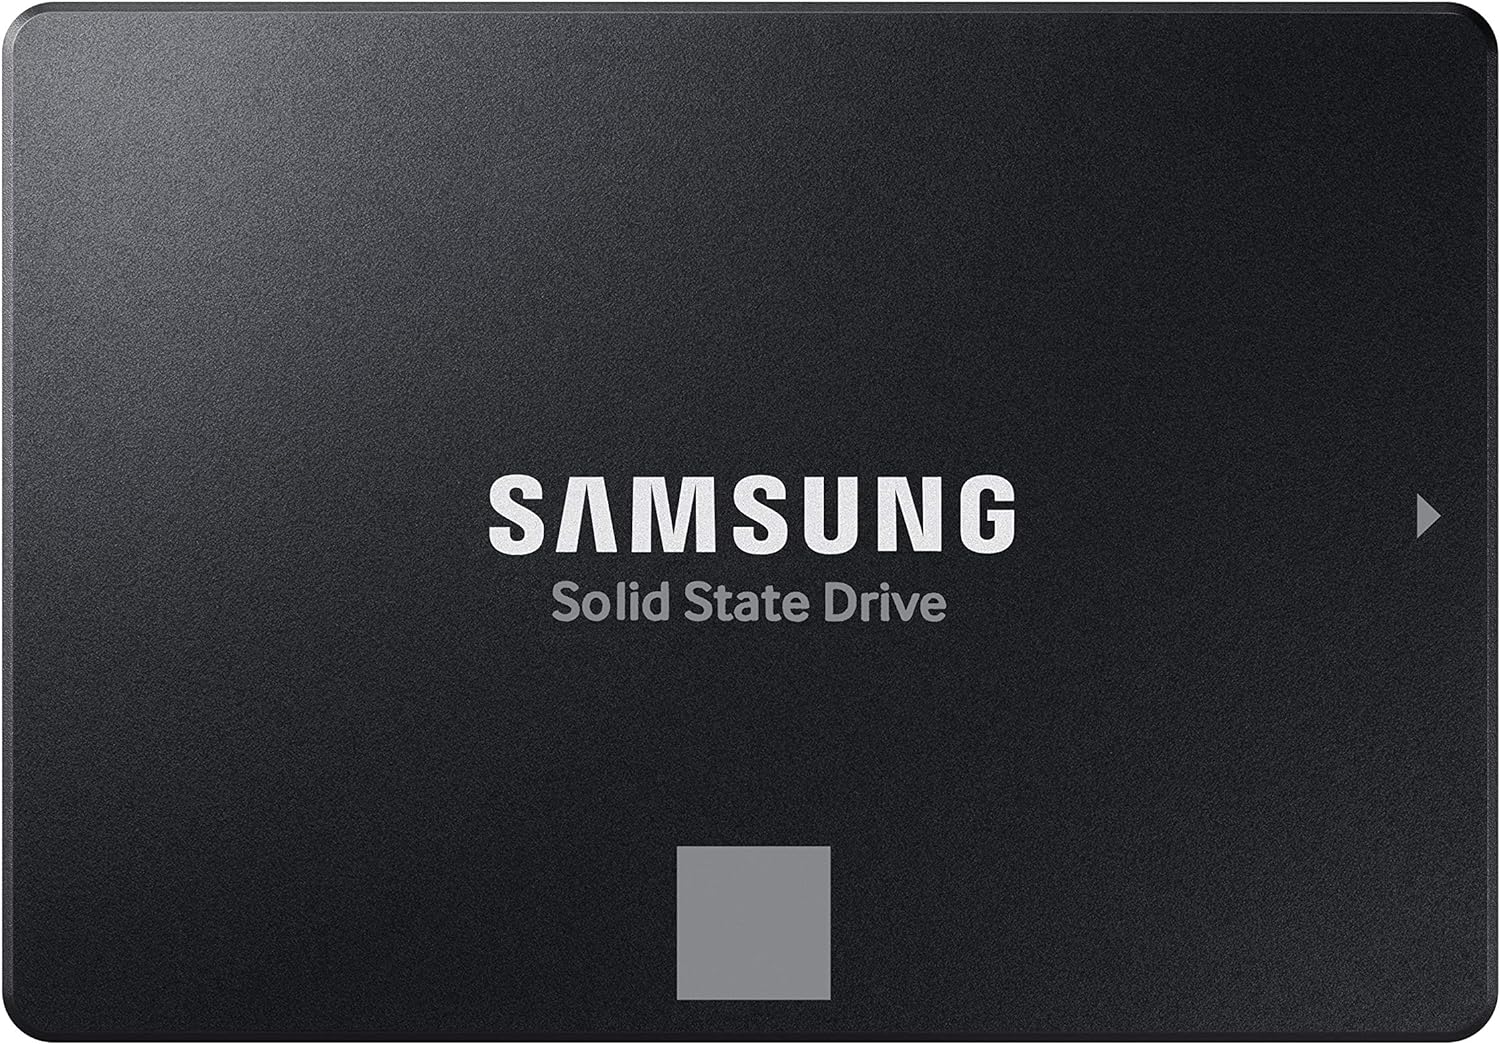 Adobe Premiere Pro System Requirements: Samsung SSD Drive